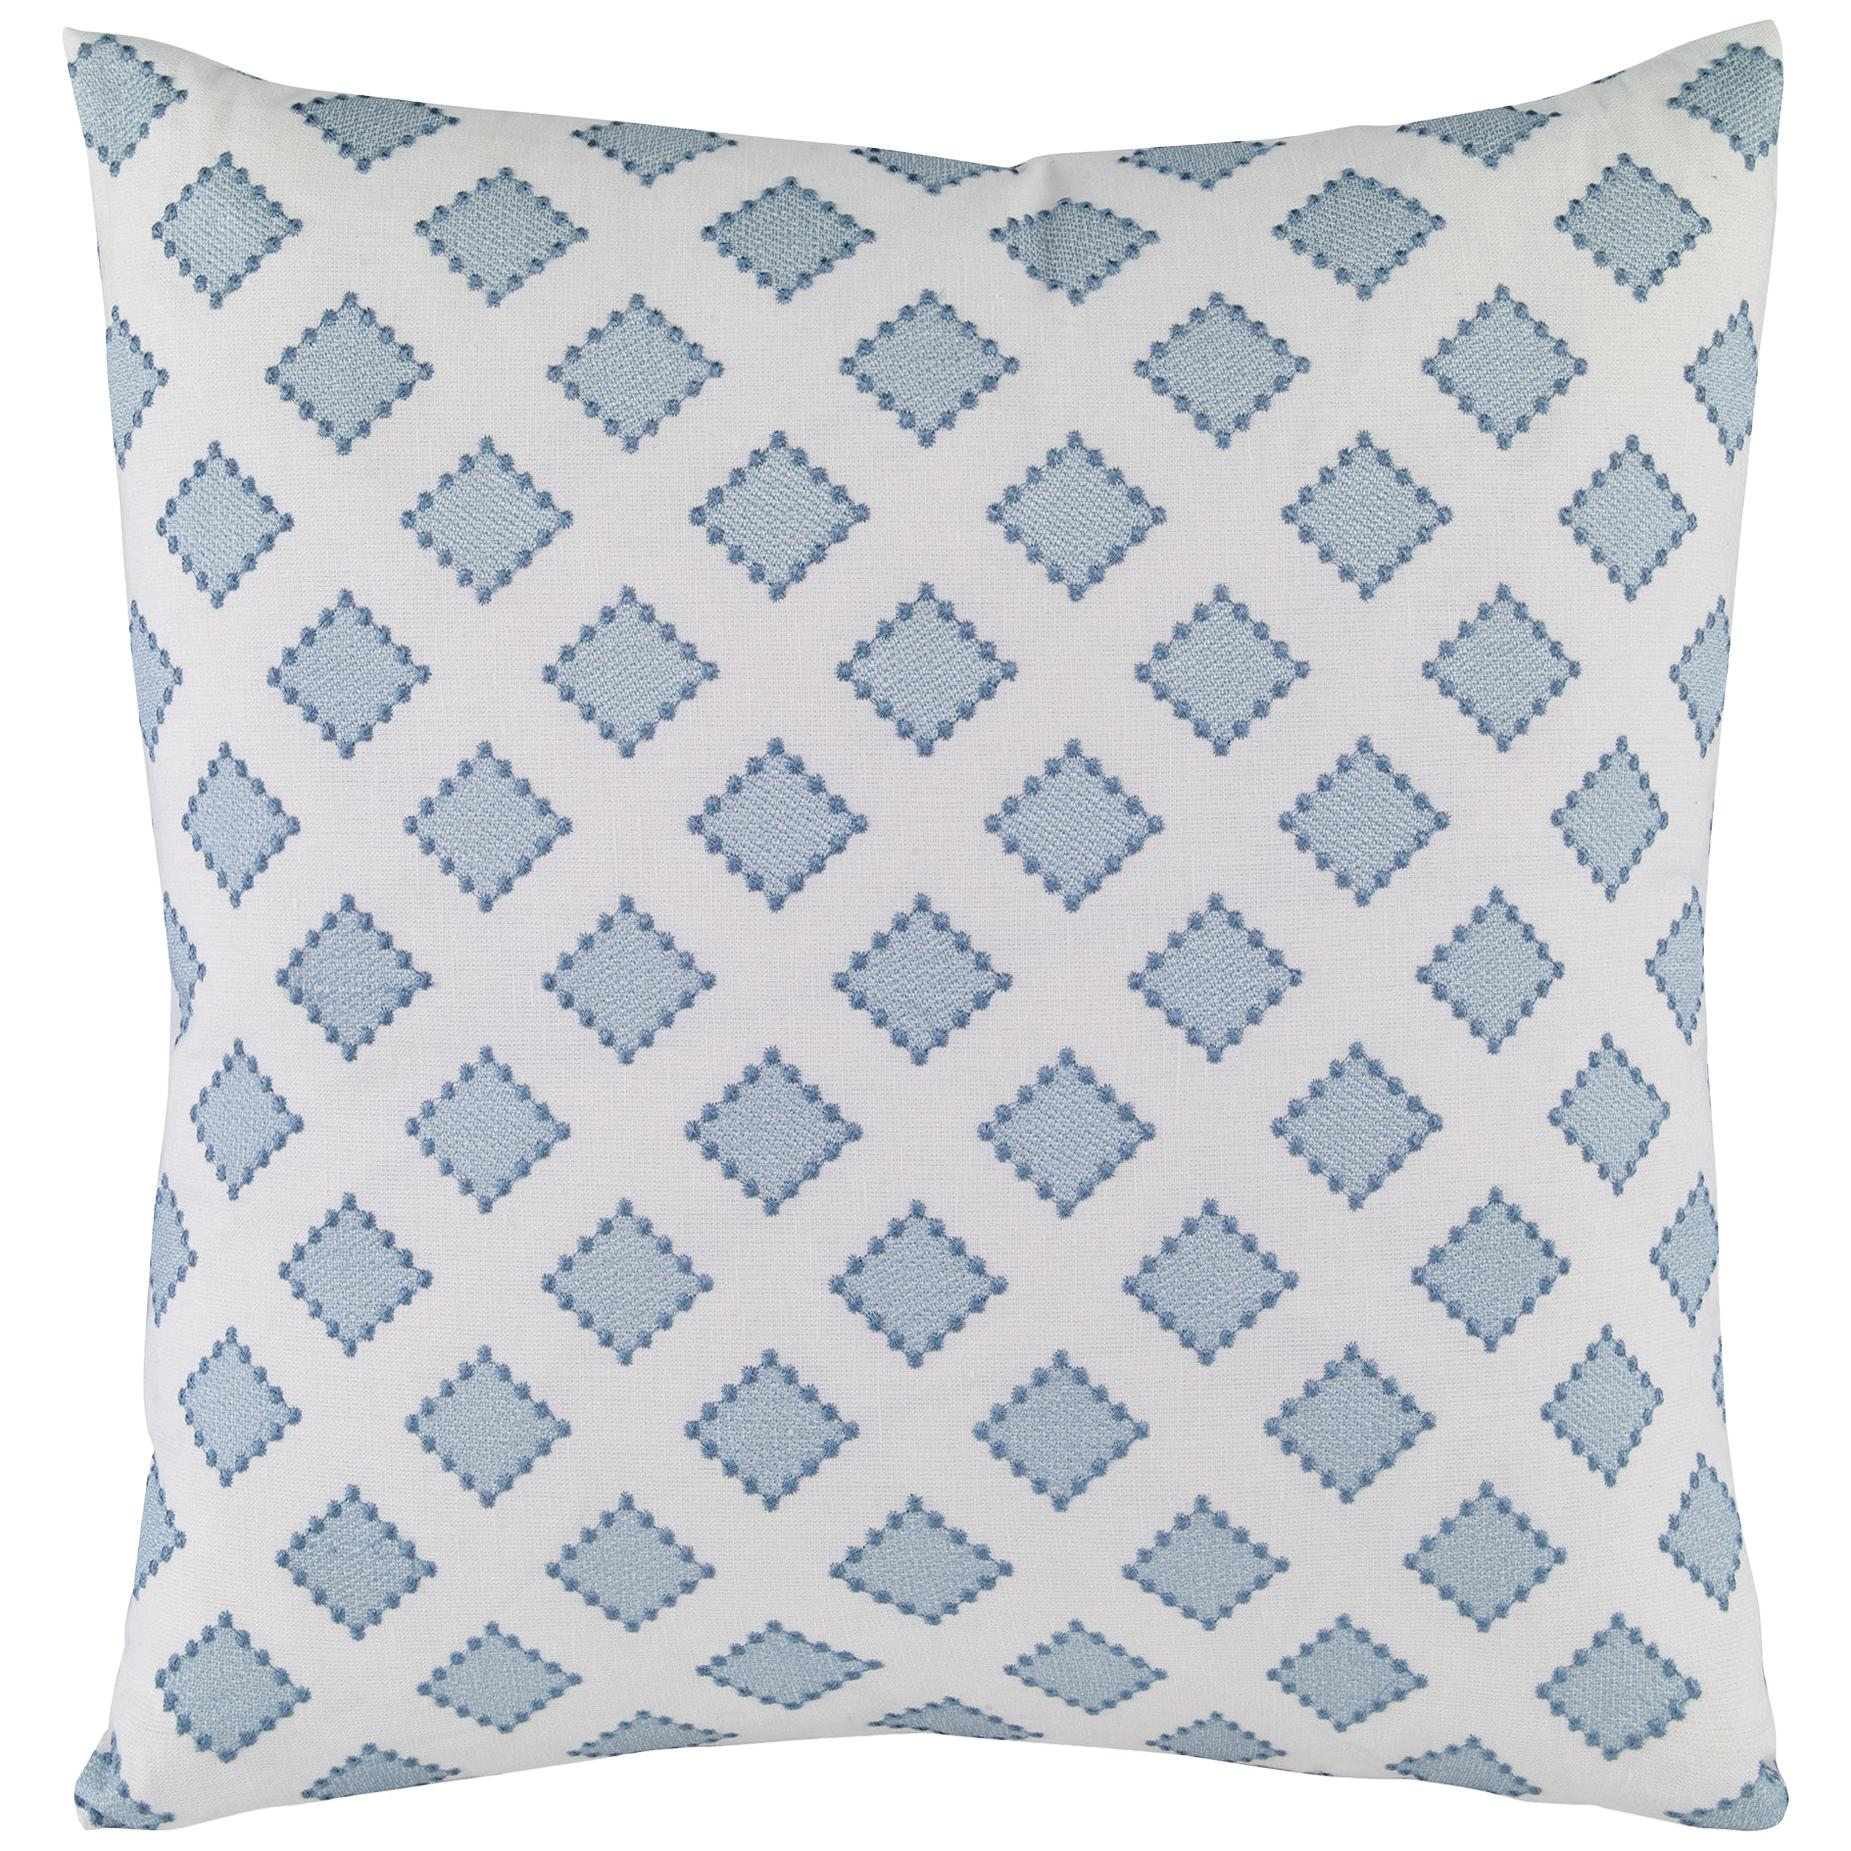 Diamondots Pillow in Turquoise by CuratedKravet